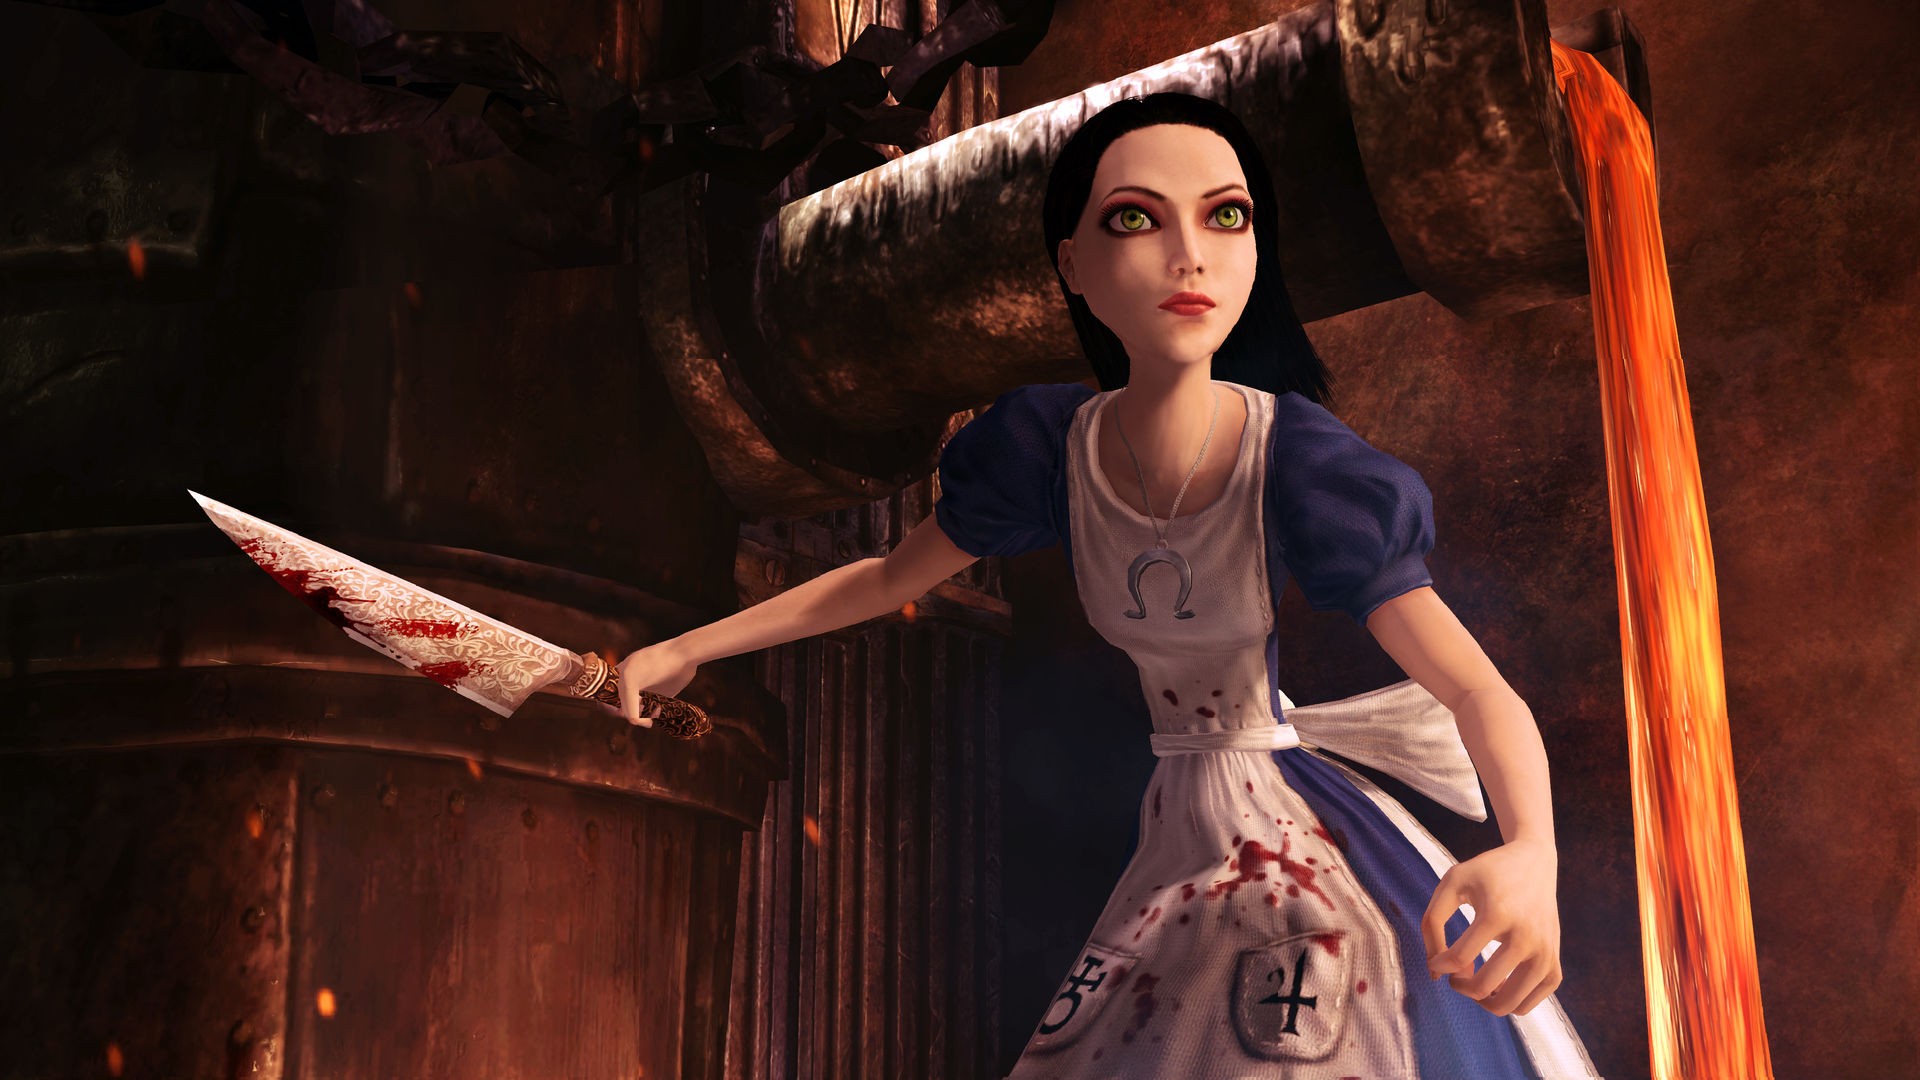 American McGee is leaving game dev following rejection of Alice: Madness  Returns sequel